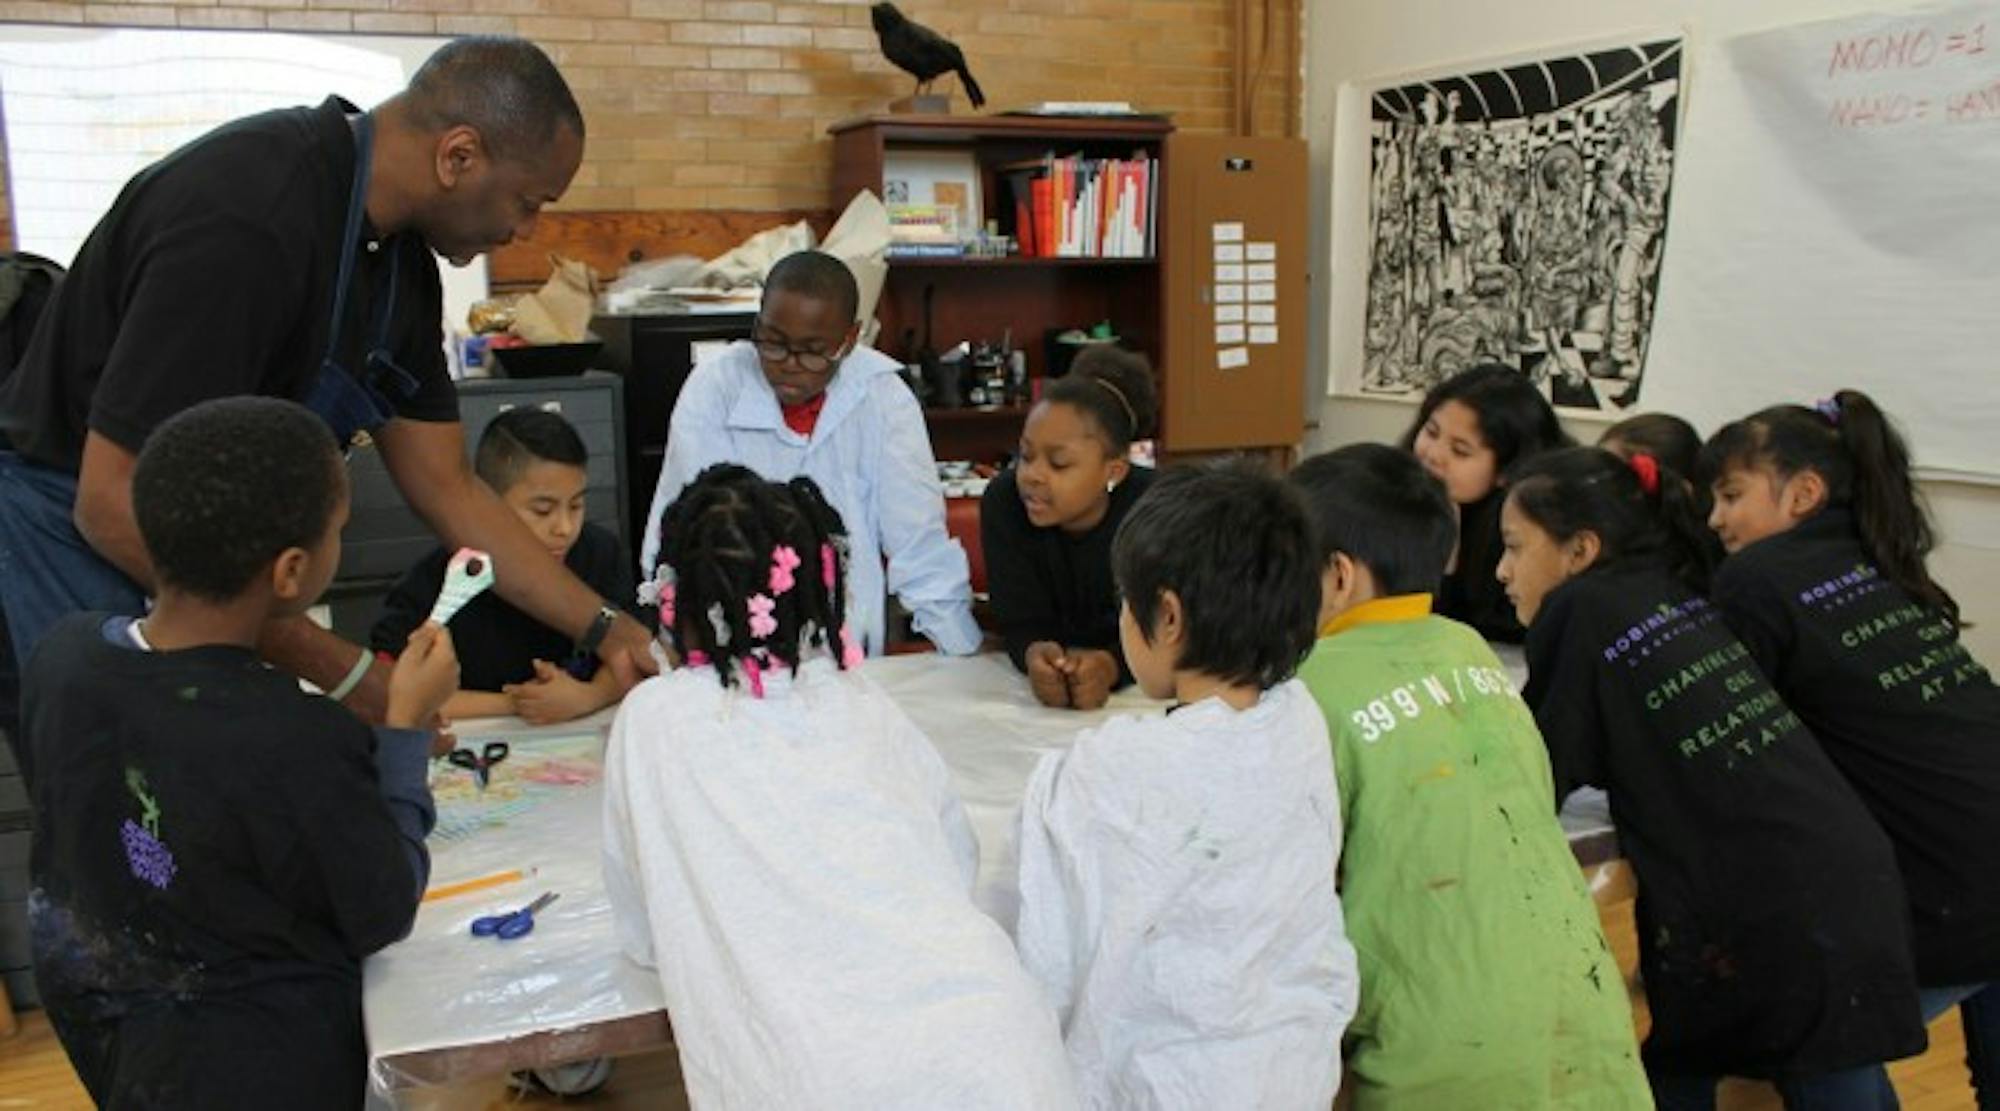 Artist Steve Prince leads children in the Notre Dame Center for Arts and Culture's (NDCAC) after school program in a mono type print workshop activity in March 2017. The NDCAC offers a variety of educational programs.